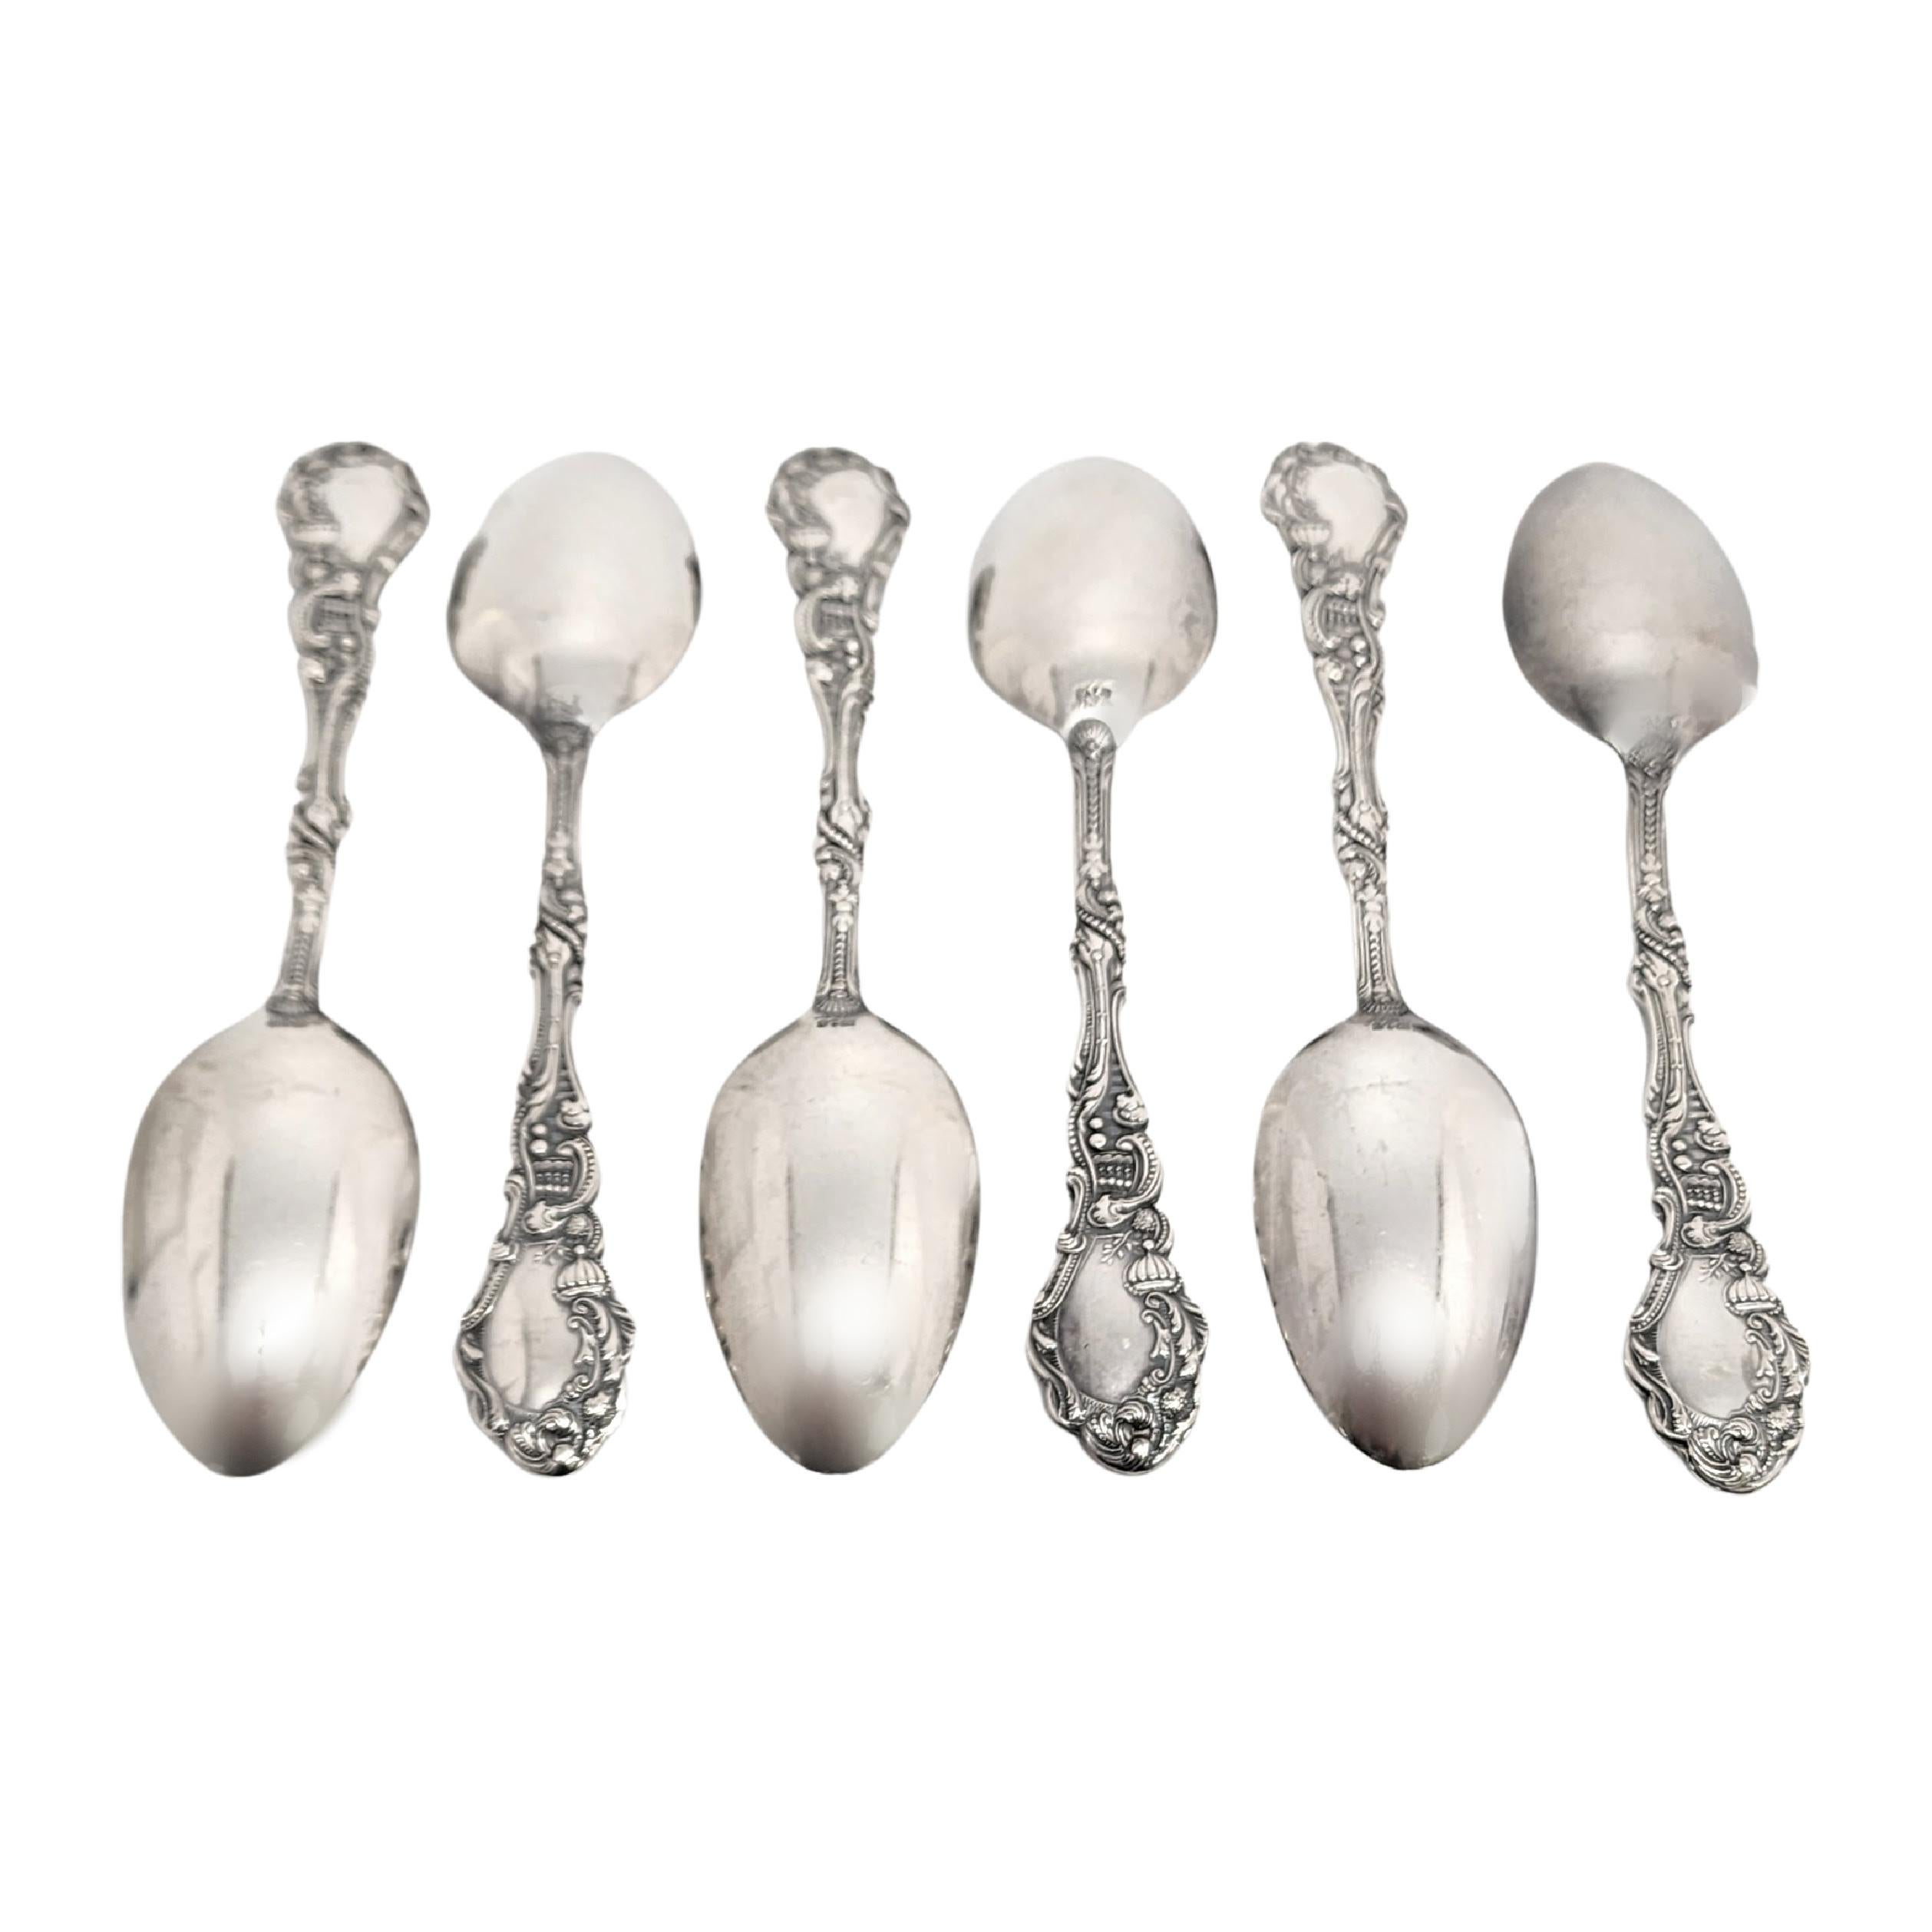 Set of 6 sterling silver teaspoons by Gorham in the Versailles pattern.

No monogram

Gorham's Versailles is a multi motif pattern designed by Antoine Heller in 1885. Named for the Palace of Versailles, the pattern depicts ornate scenes of Classical